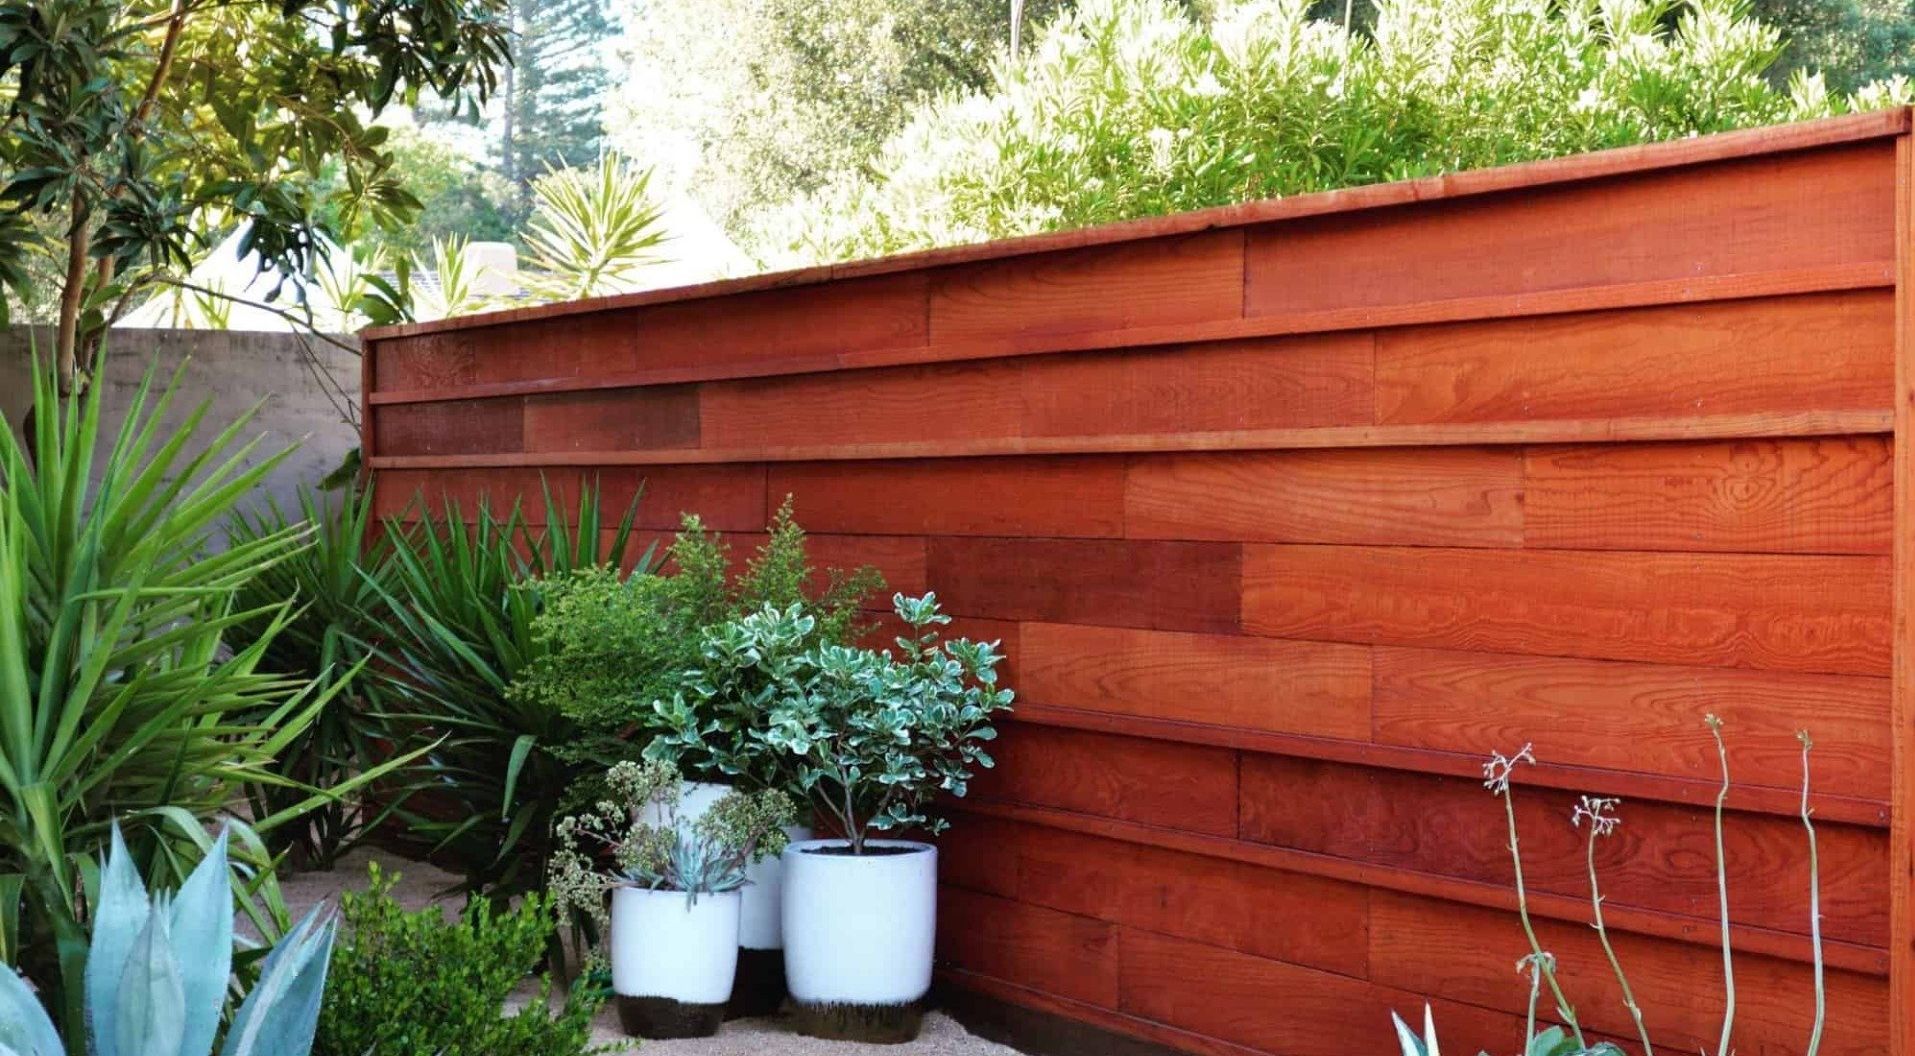 How to balance form and function in your retaining wall design